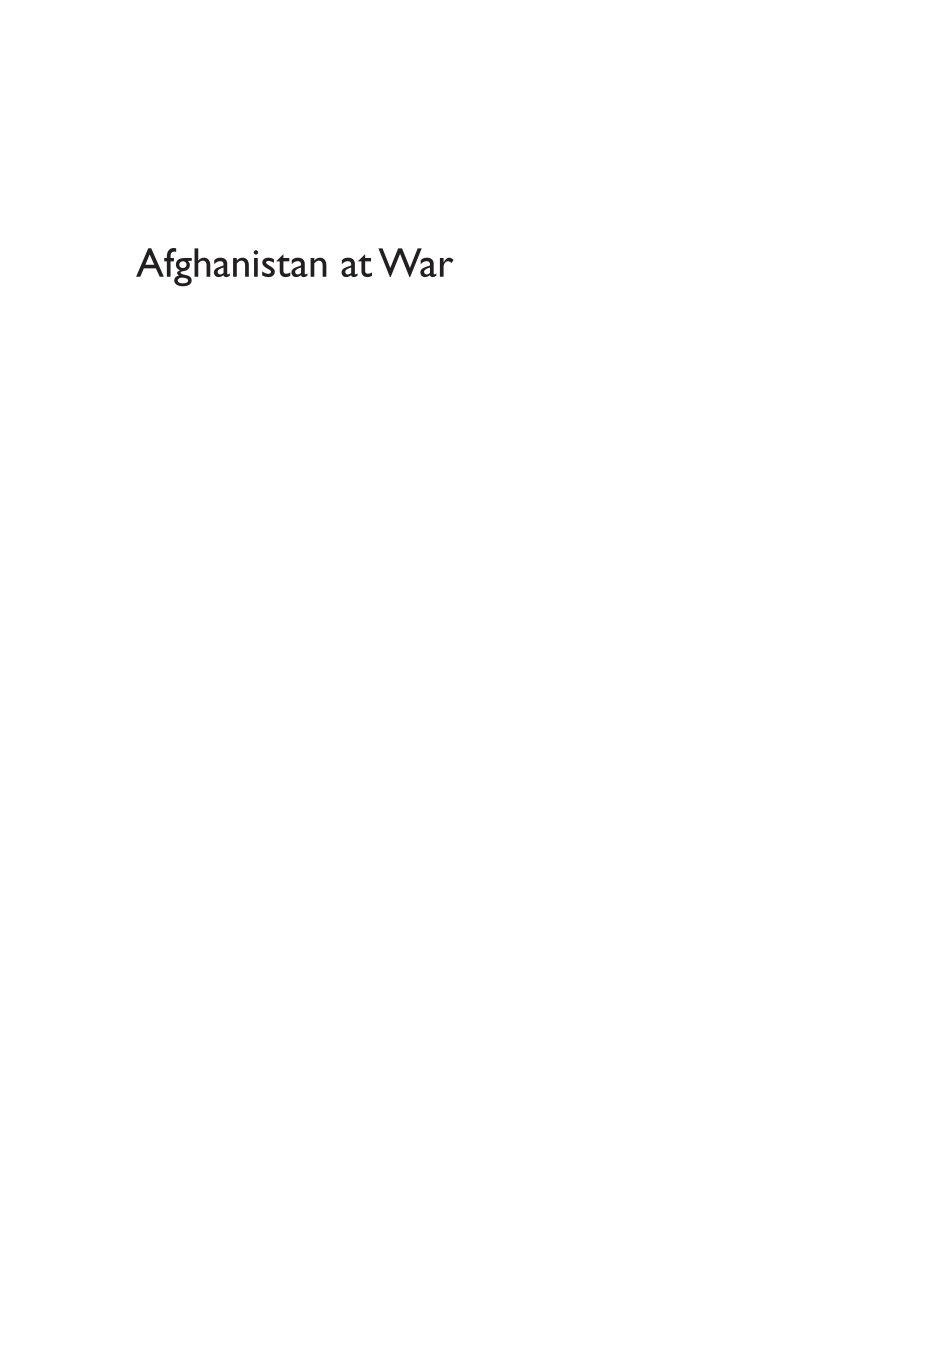 Afghanistan at War: From the 18th-Century Durrani Dynasty to the 21st Century page i